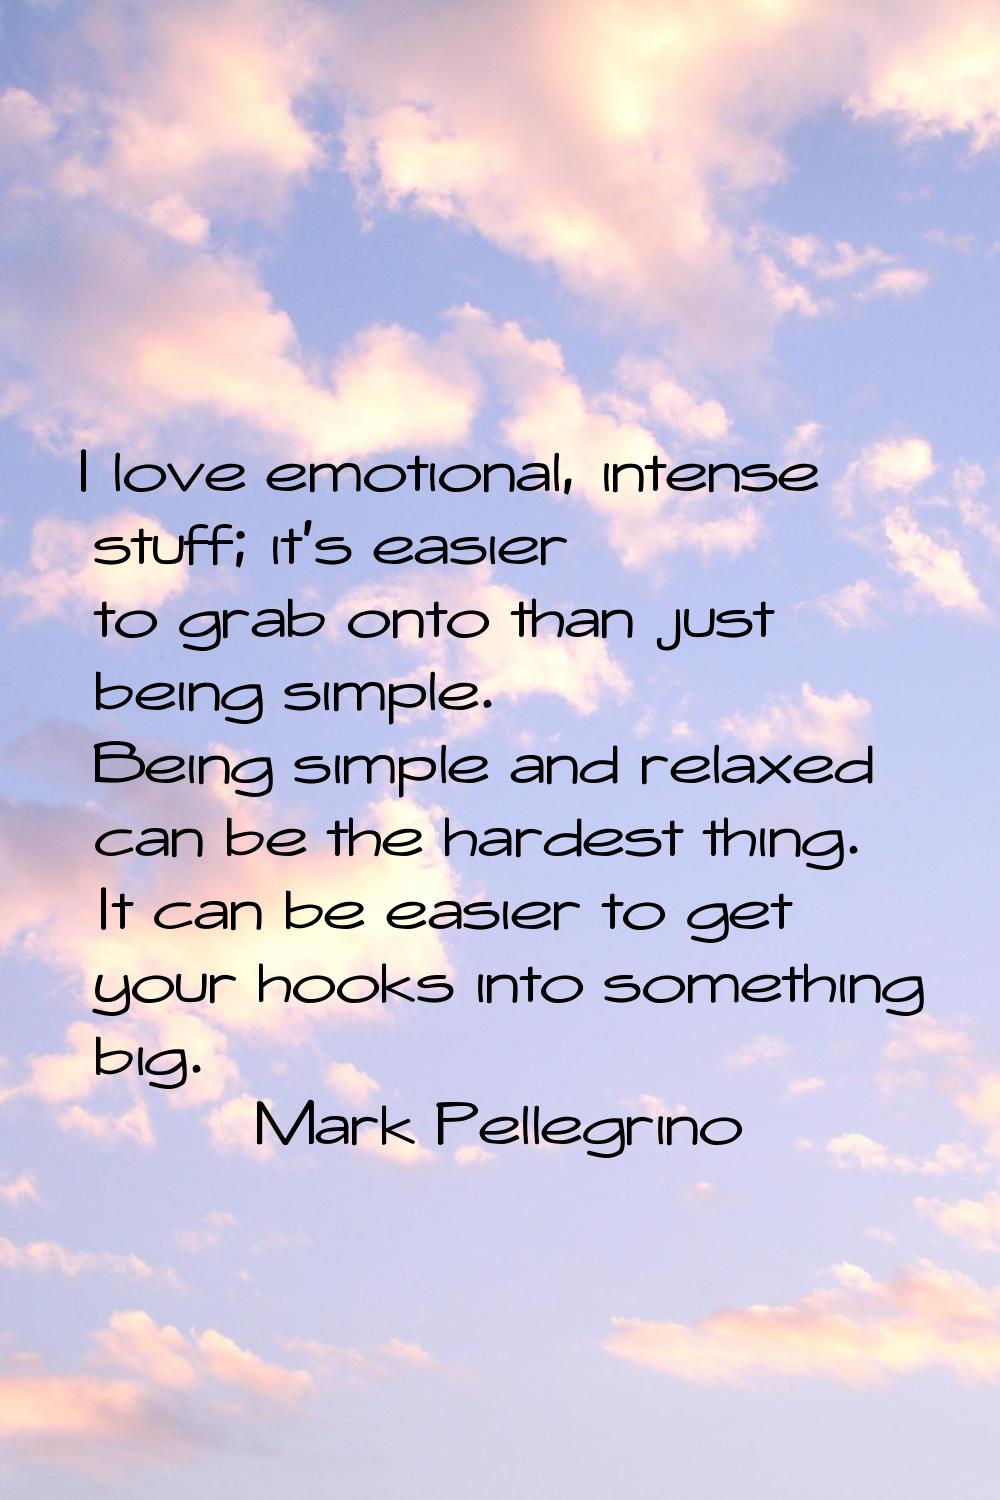 I love emotional, intense stuff; it's easier to grab onto than just being simple. Being simple and 